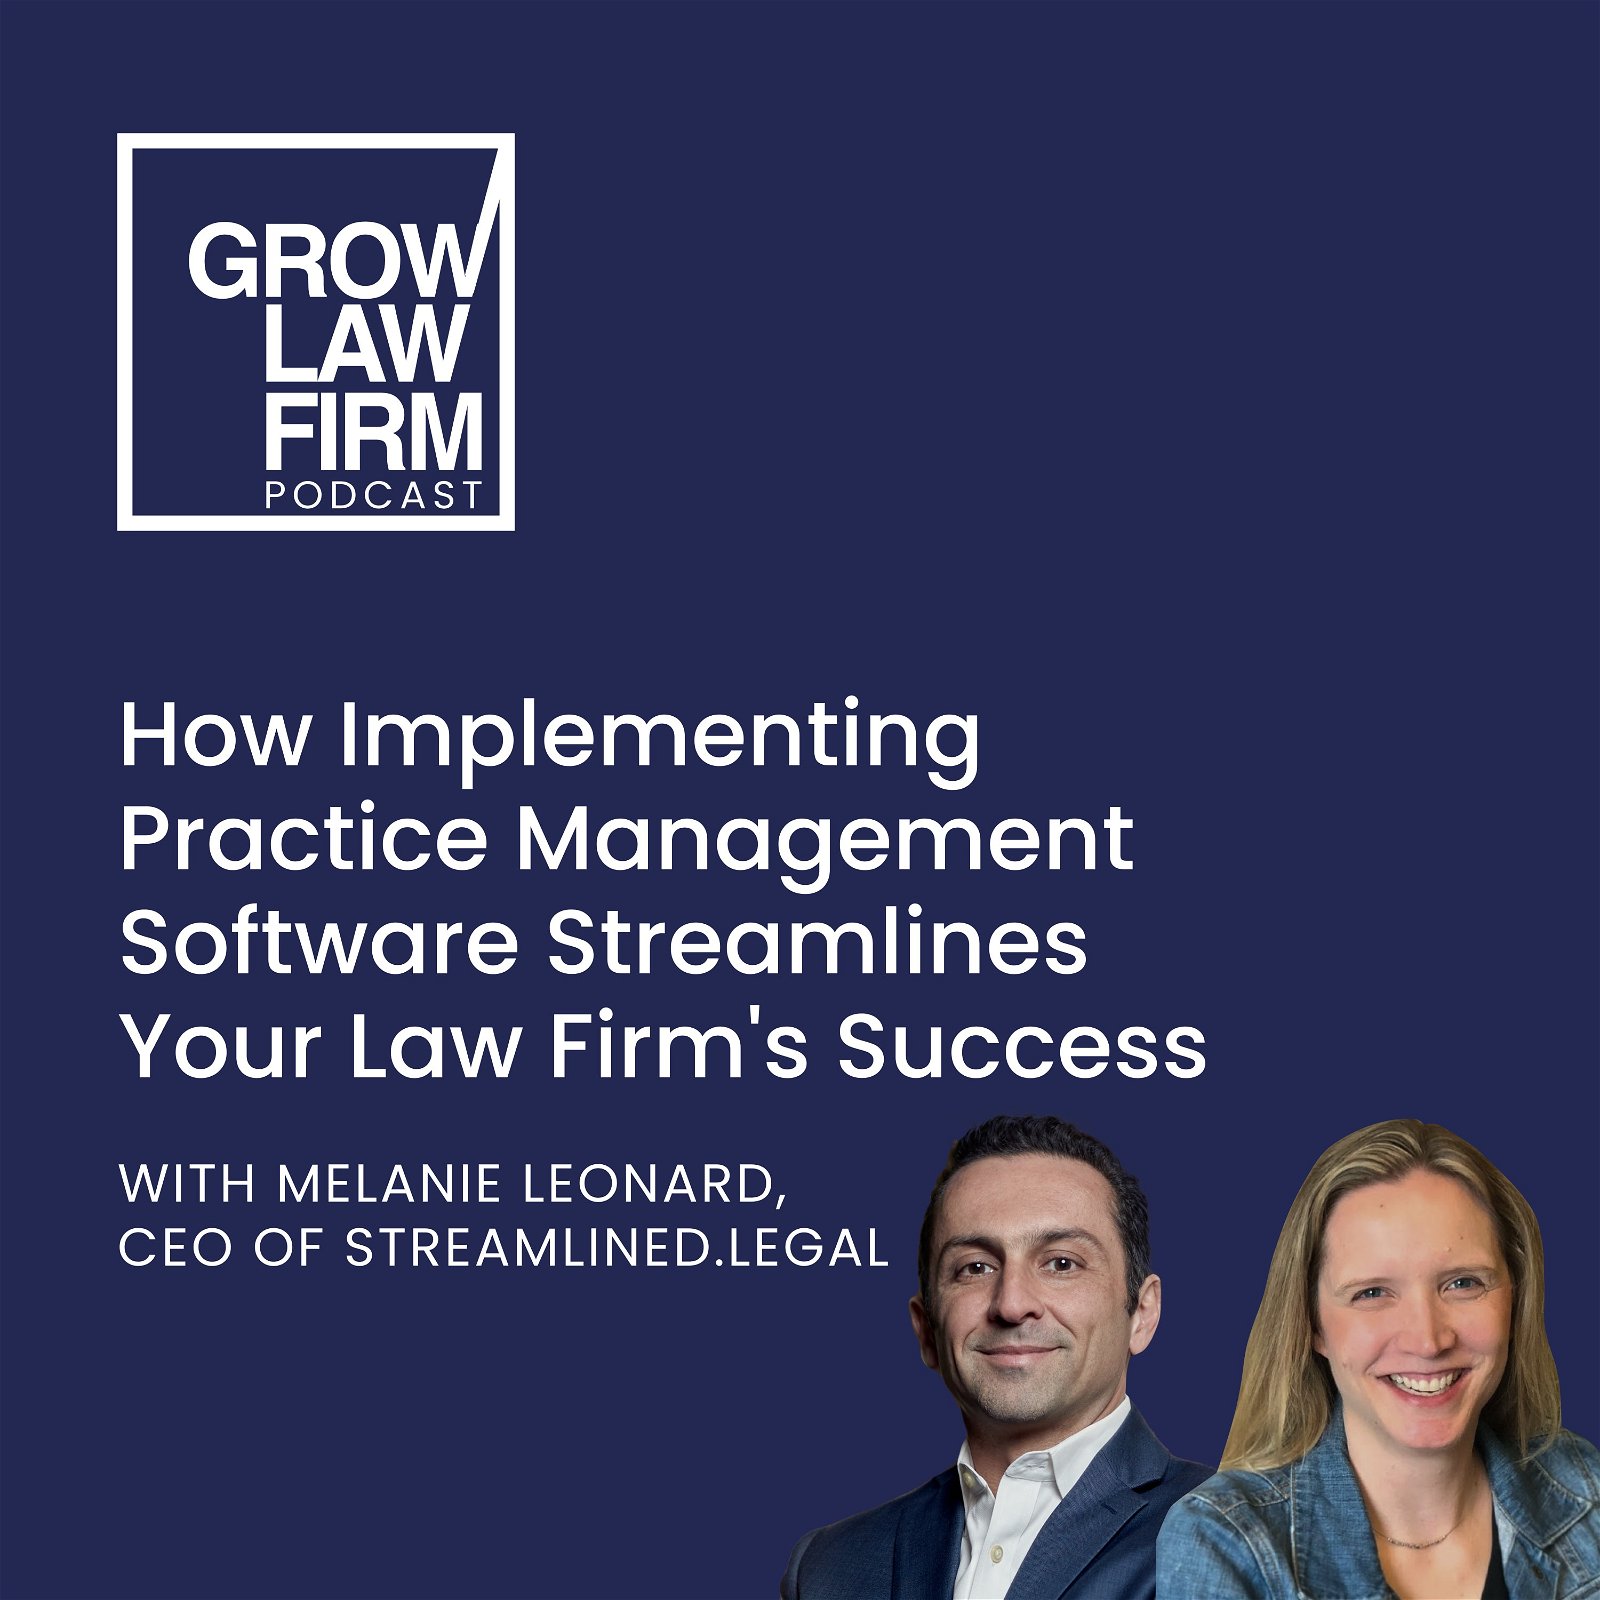 How Implementing Practice Management Software Streamlines Your Law Firm's Success